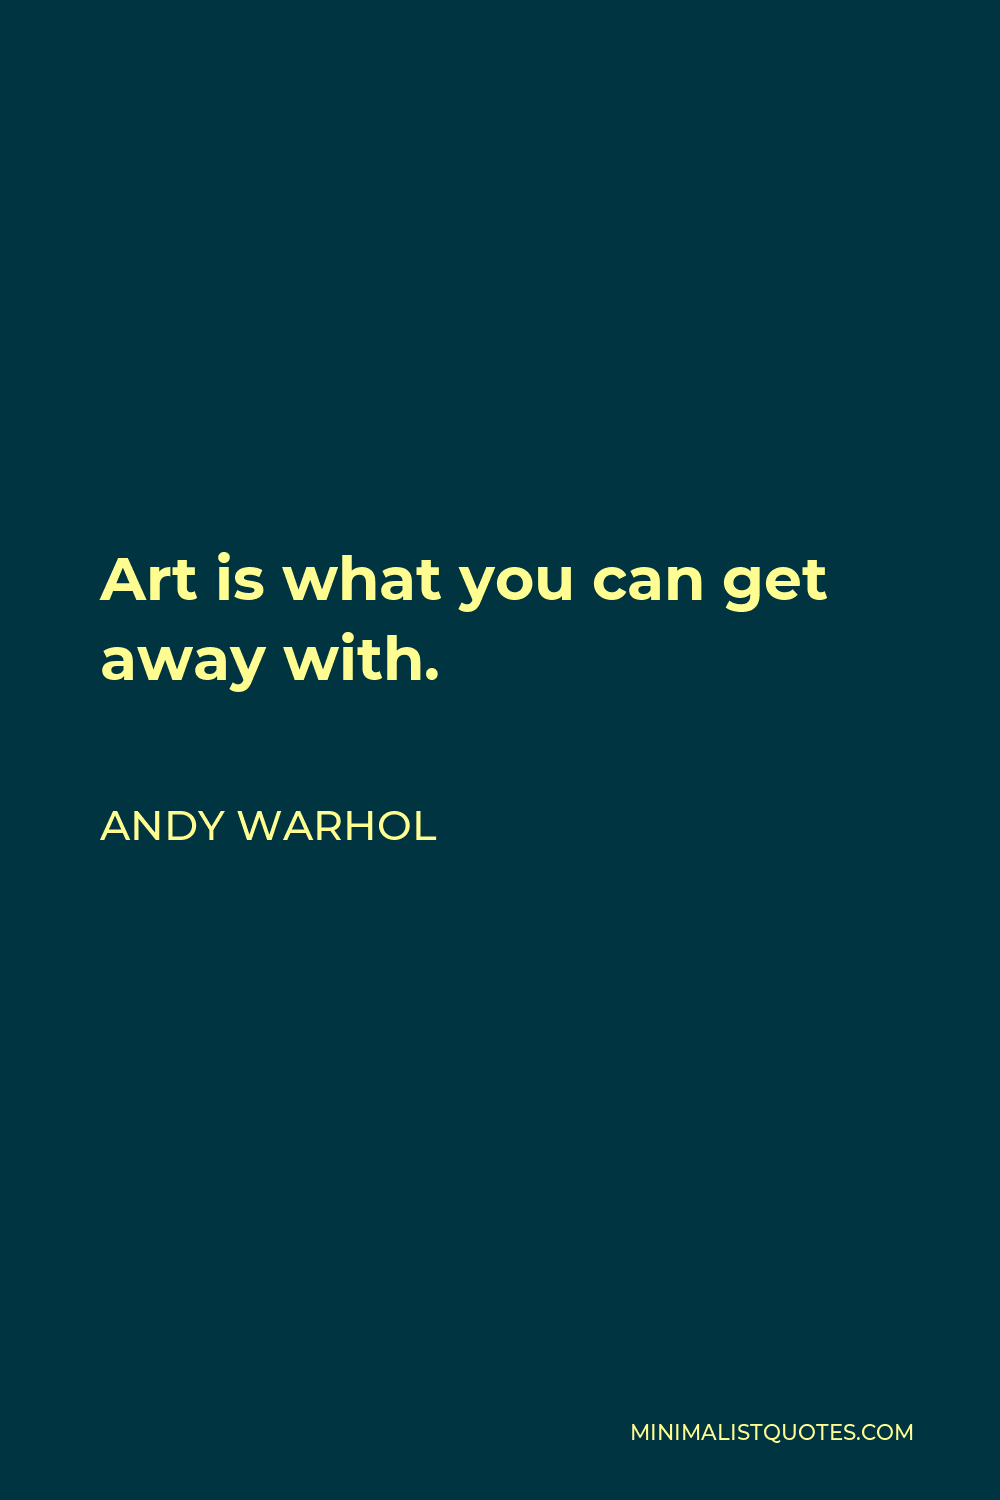 Andy Warhol Quote - Art is what you can get away with.